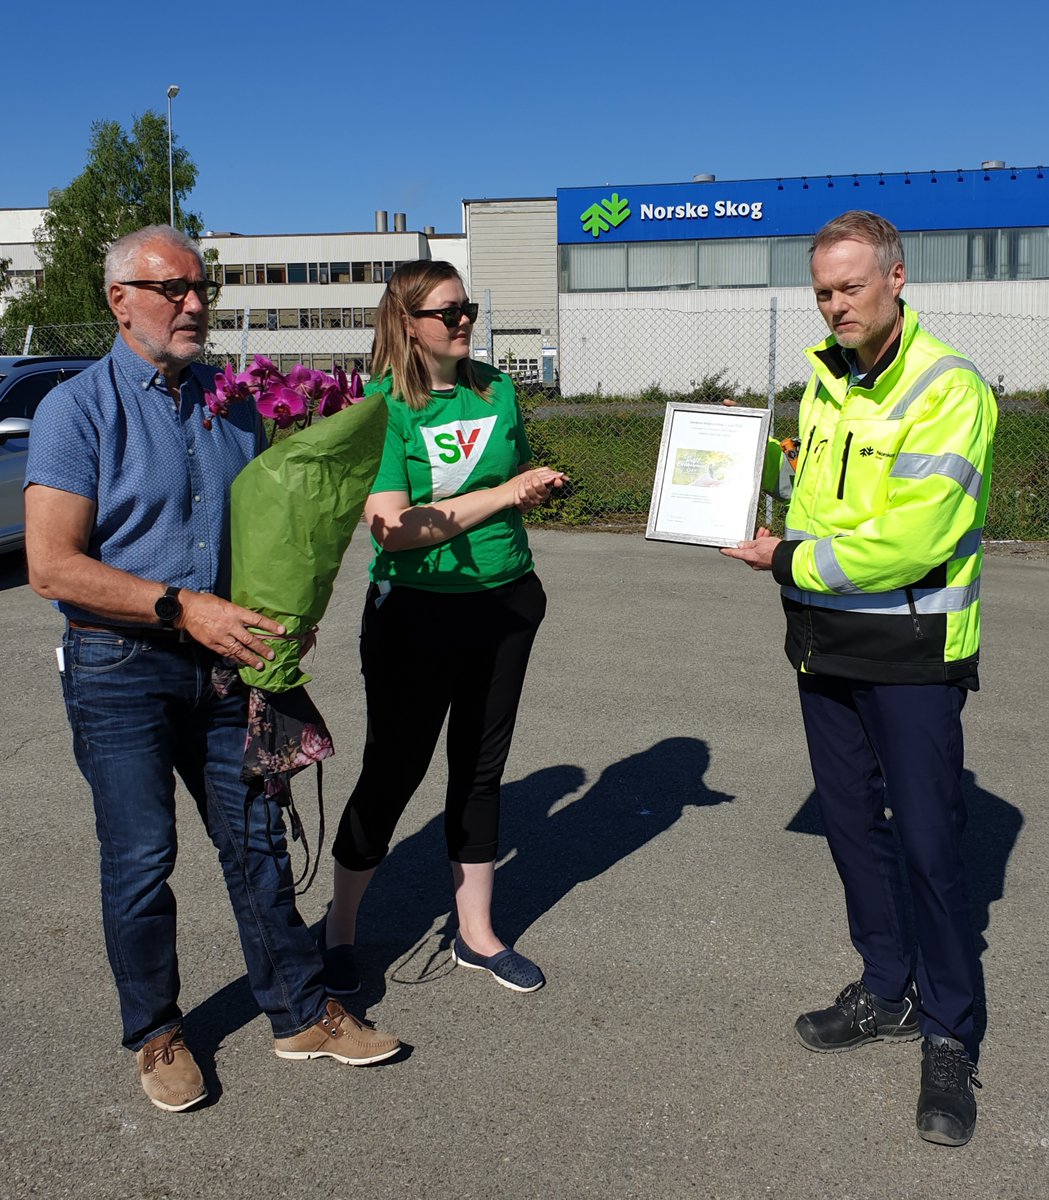 Local award recognises Norske Skog Skogn for its achievement in converting the site's timber transportation from trucks to trains. 

This means reduced CO2 emissions, safer roads, less airborne dust, and lowered exhaust emissions.

Read more: https://t.co/Qnyw8weQc2 https://t.co/PJHkwjZsOD